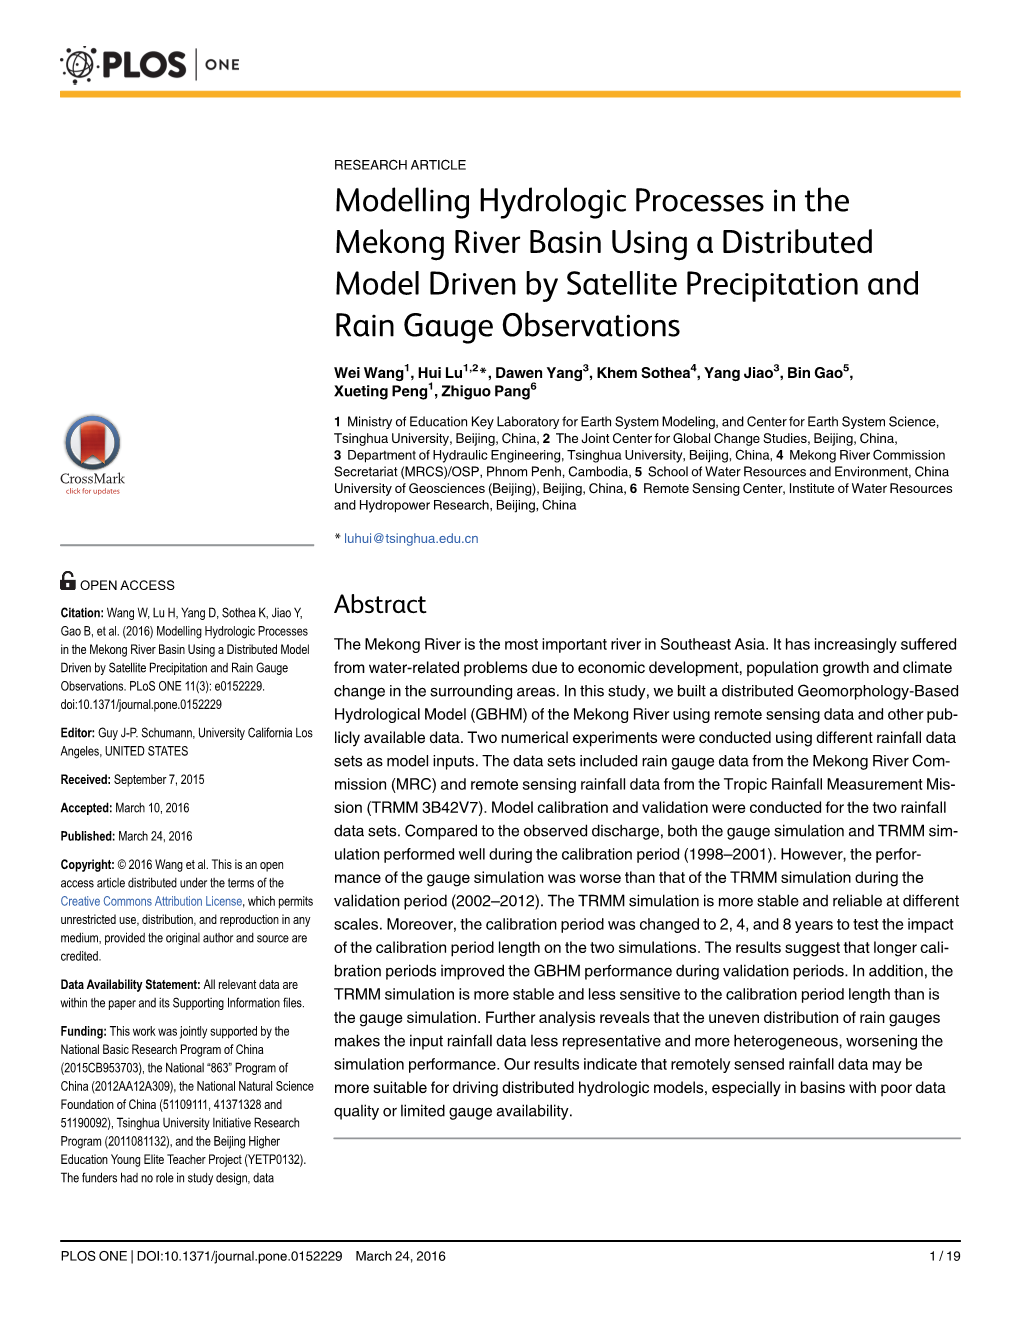 Modelling Hydrologic Processes in the Mekong River Basin Using a Distributed Model Driven by Satellite Precipitation and Rain Gauge Observations